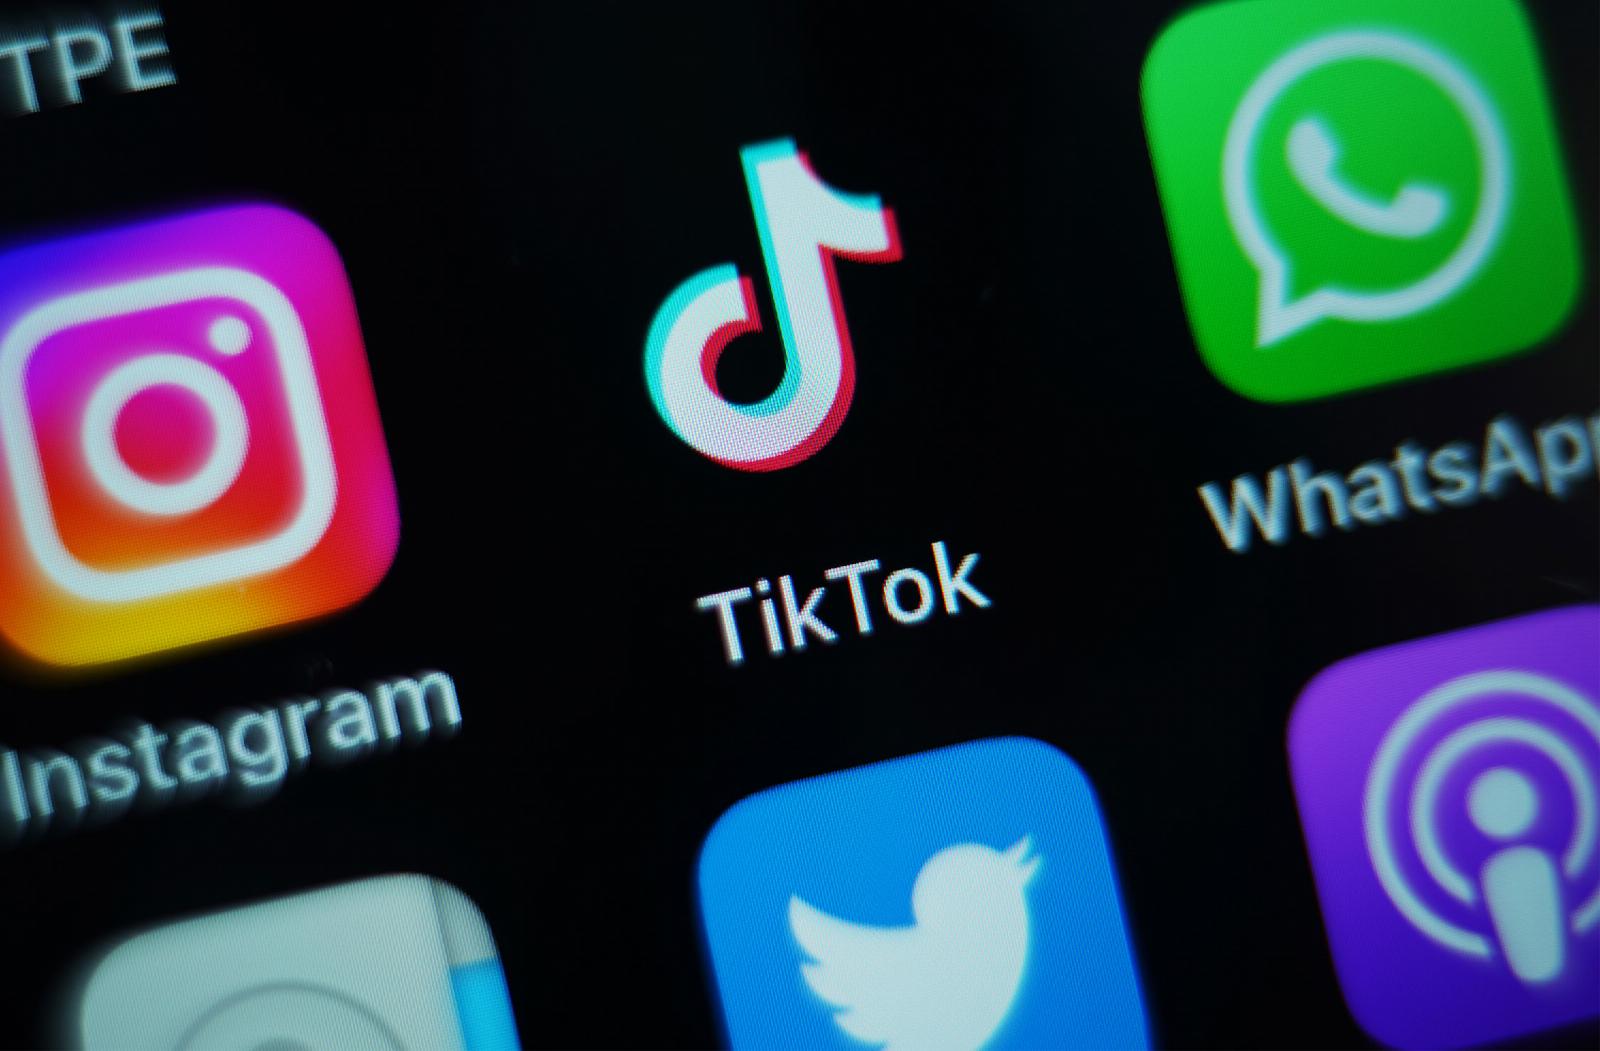 TikTok’s new monetization feature invites creators to make video ads for a chance to earn money